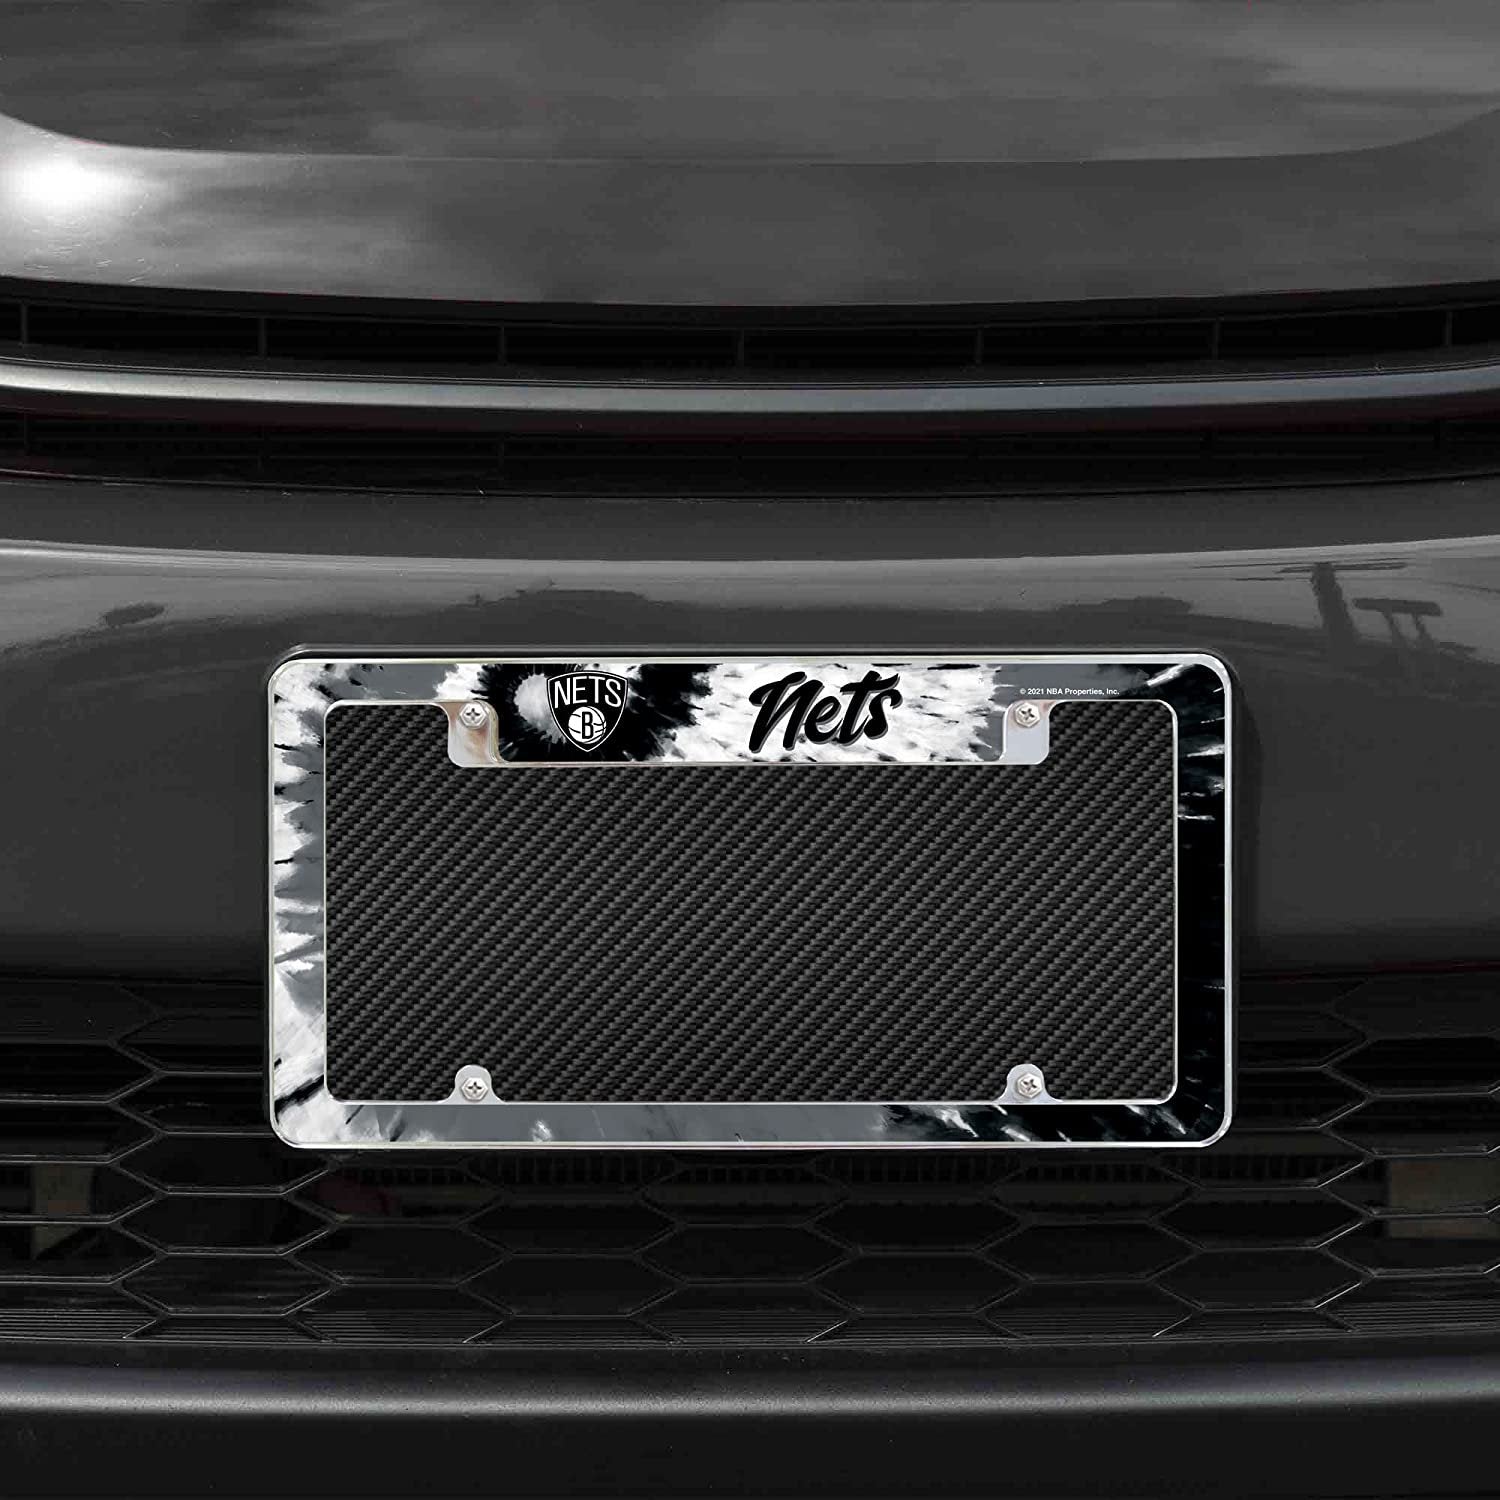 Brooklyn Nets Metal License Plate Frame Chrome Tag Cover Tie Dye Design 6x12 Inch